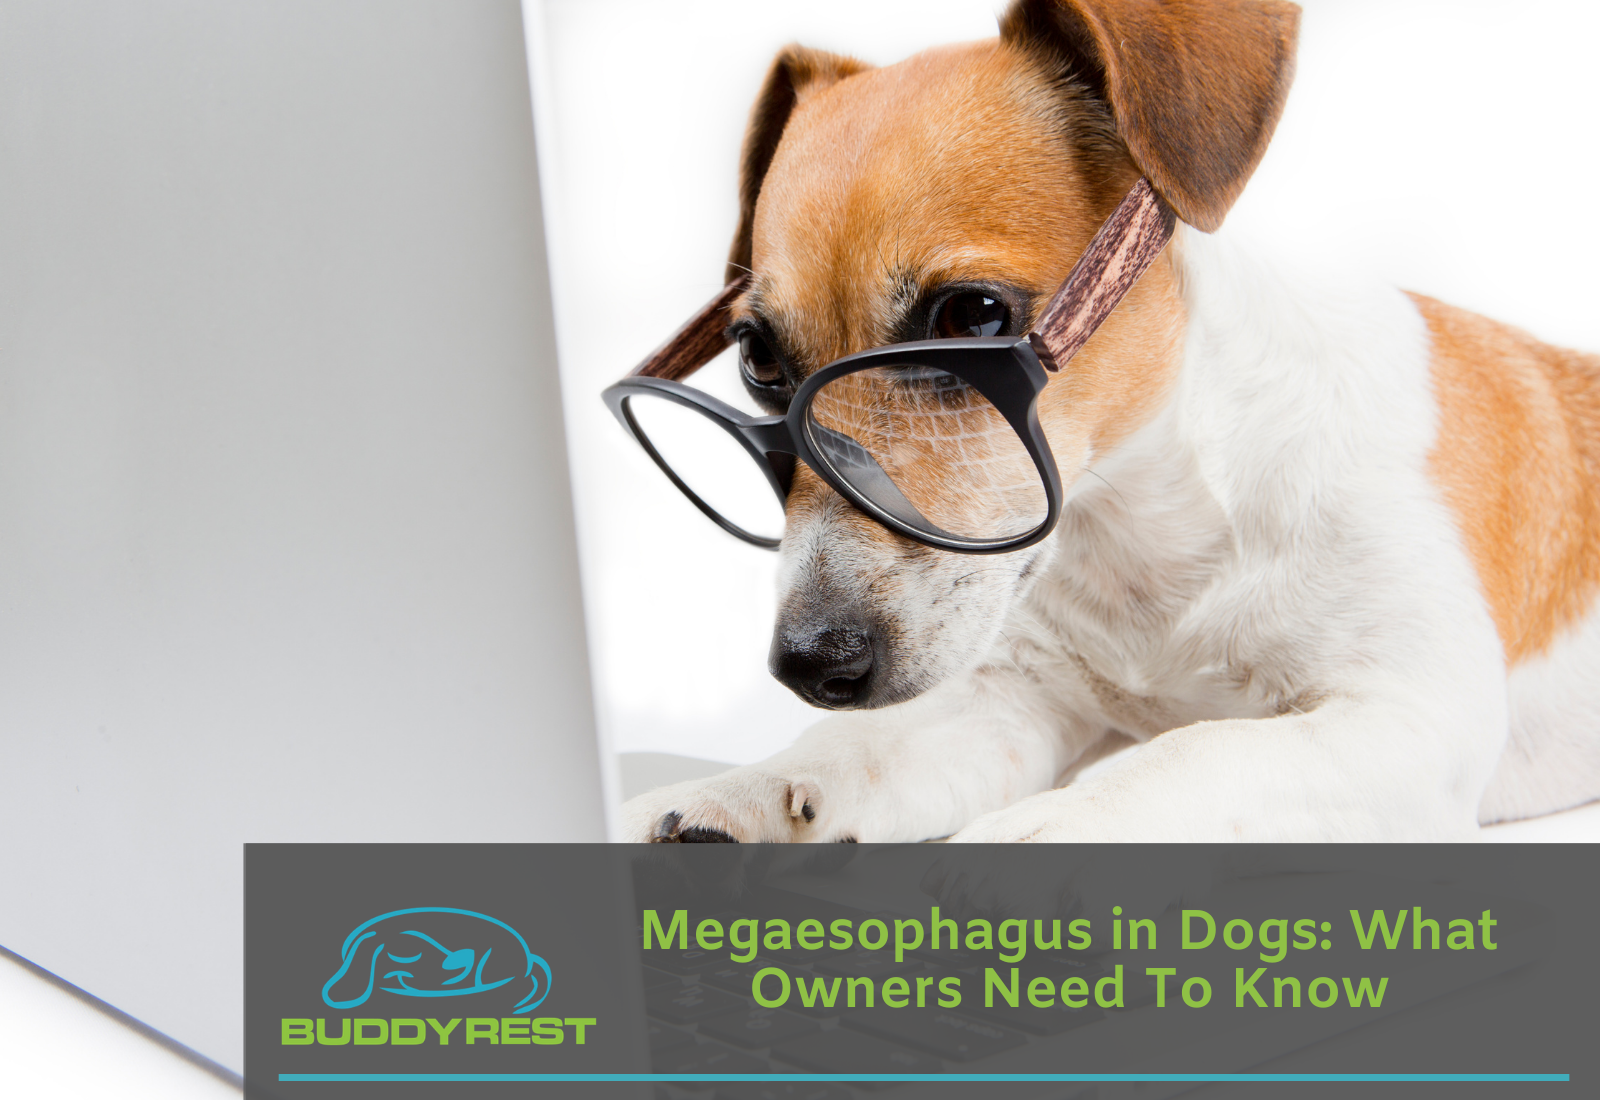 how is megaesophagus treated in dogs